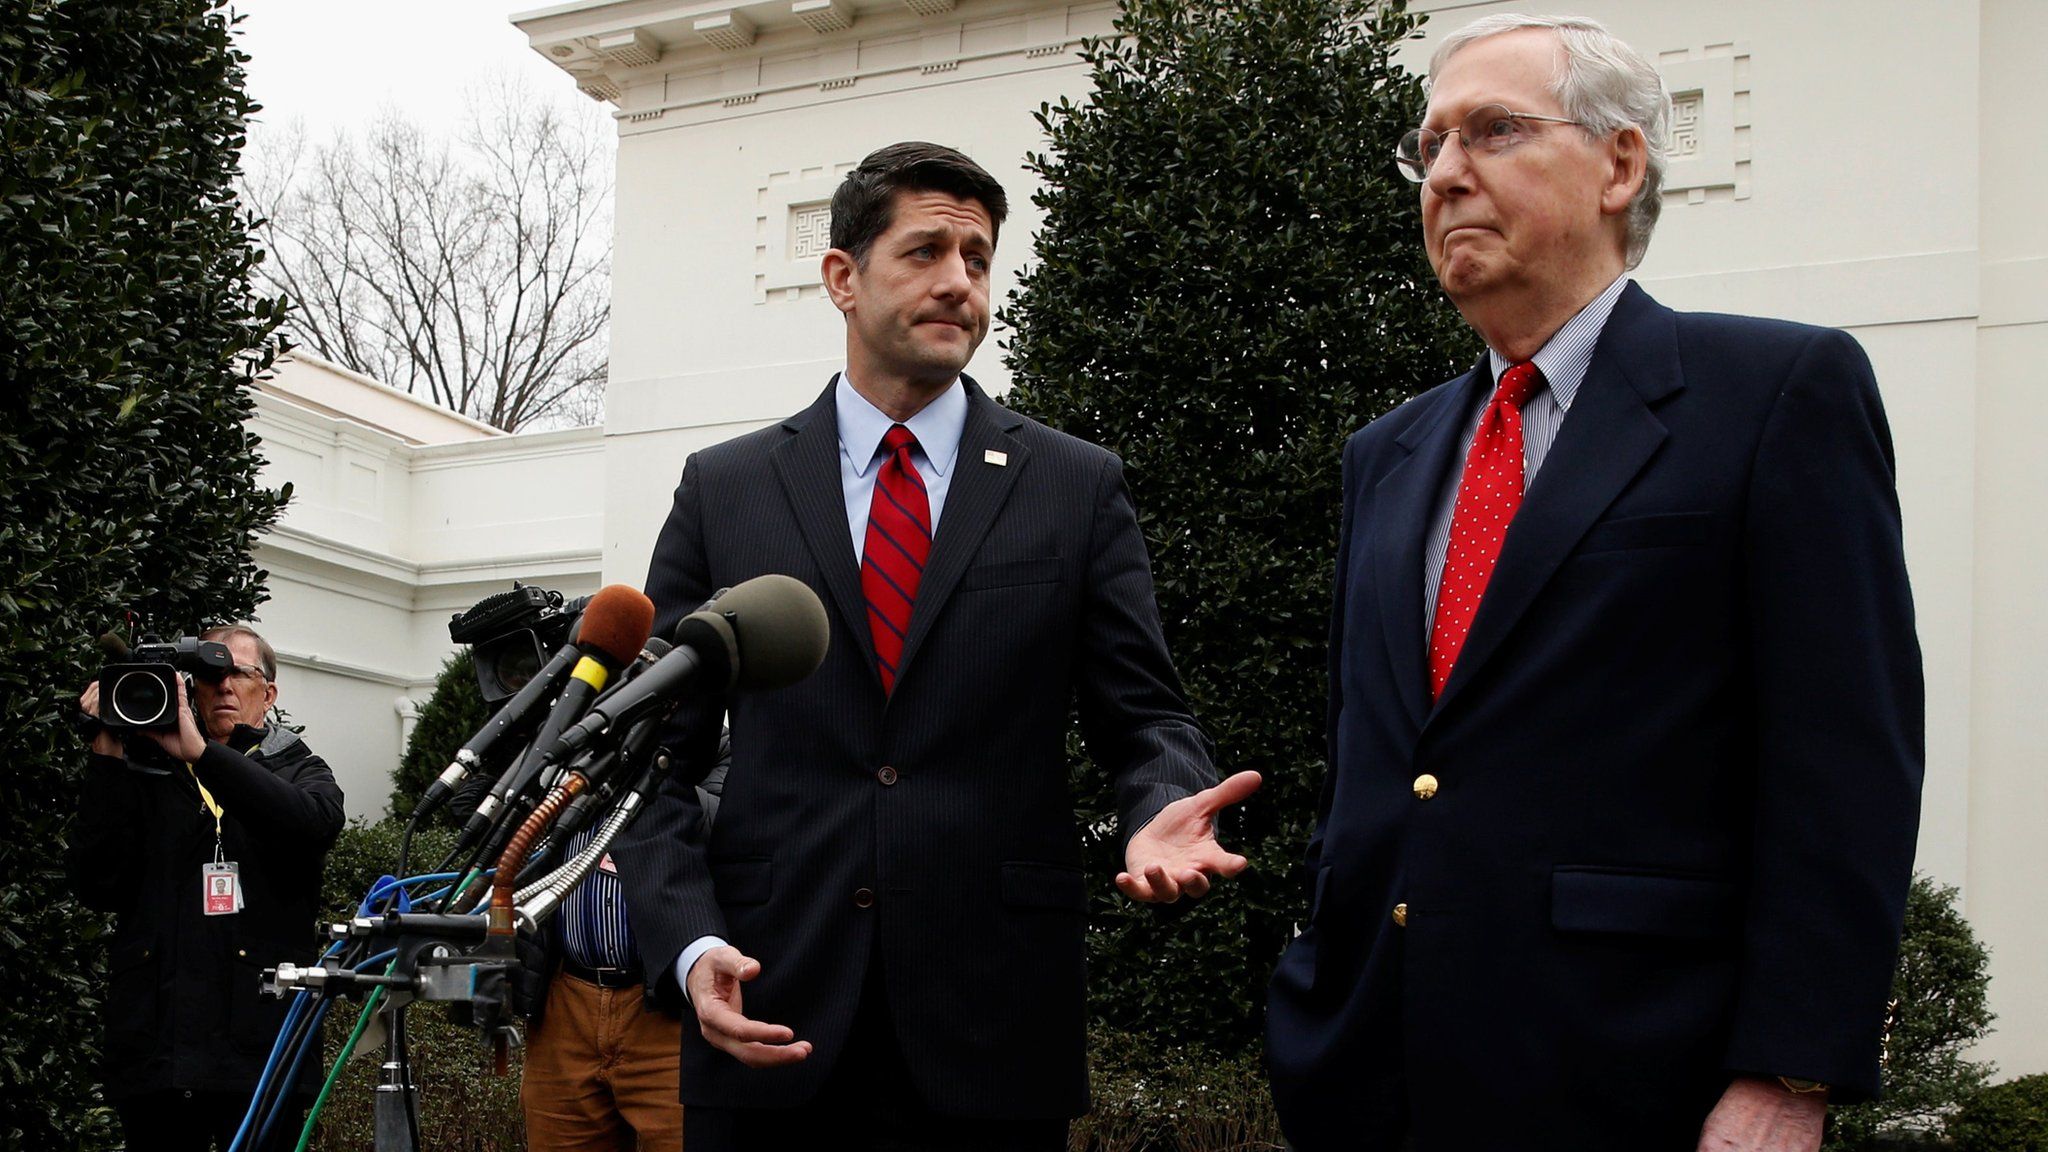 House Leader Paul Ryan and Senate majority leader Mitch McConnell